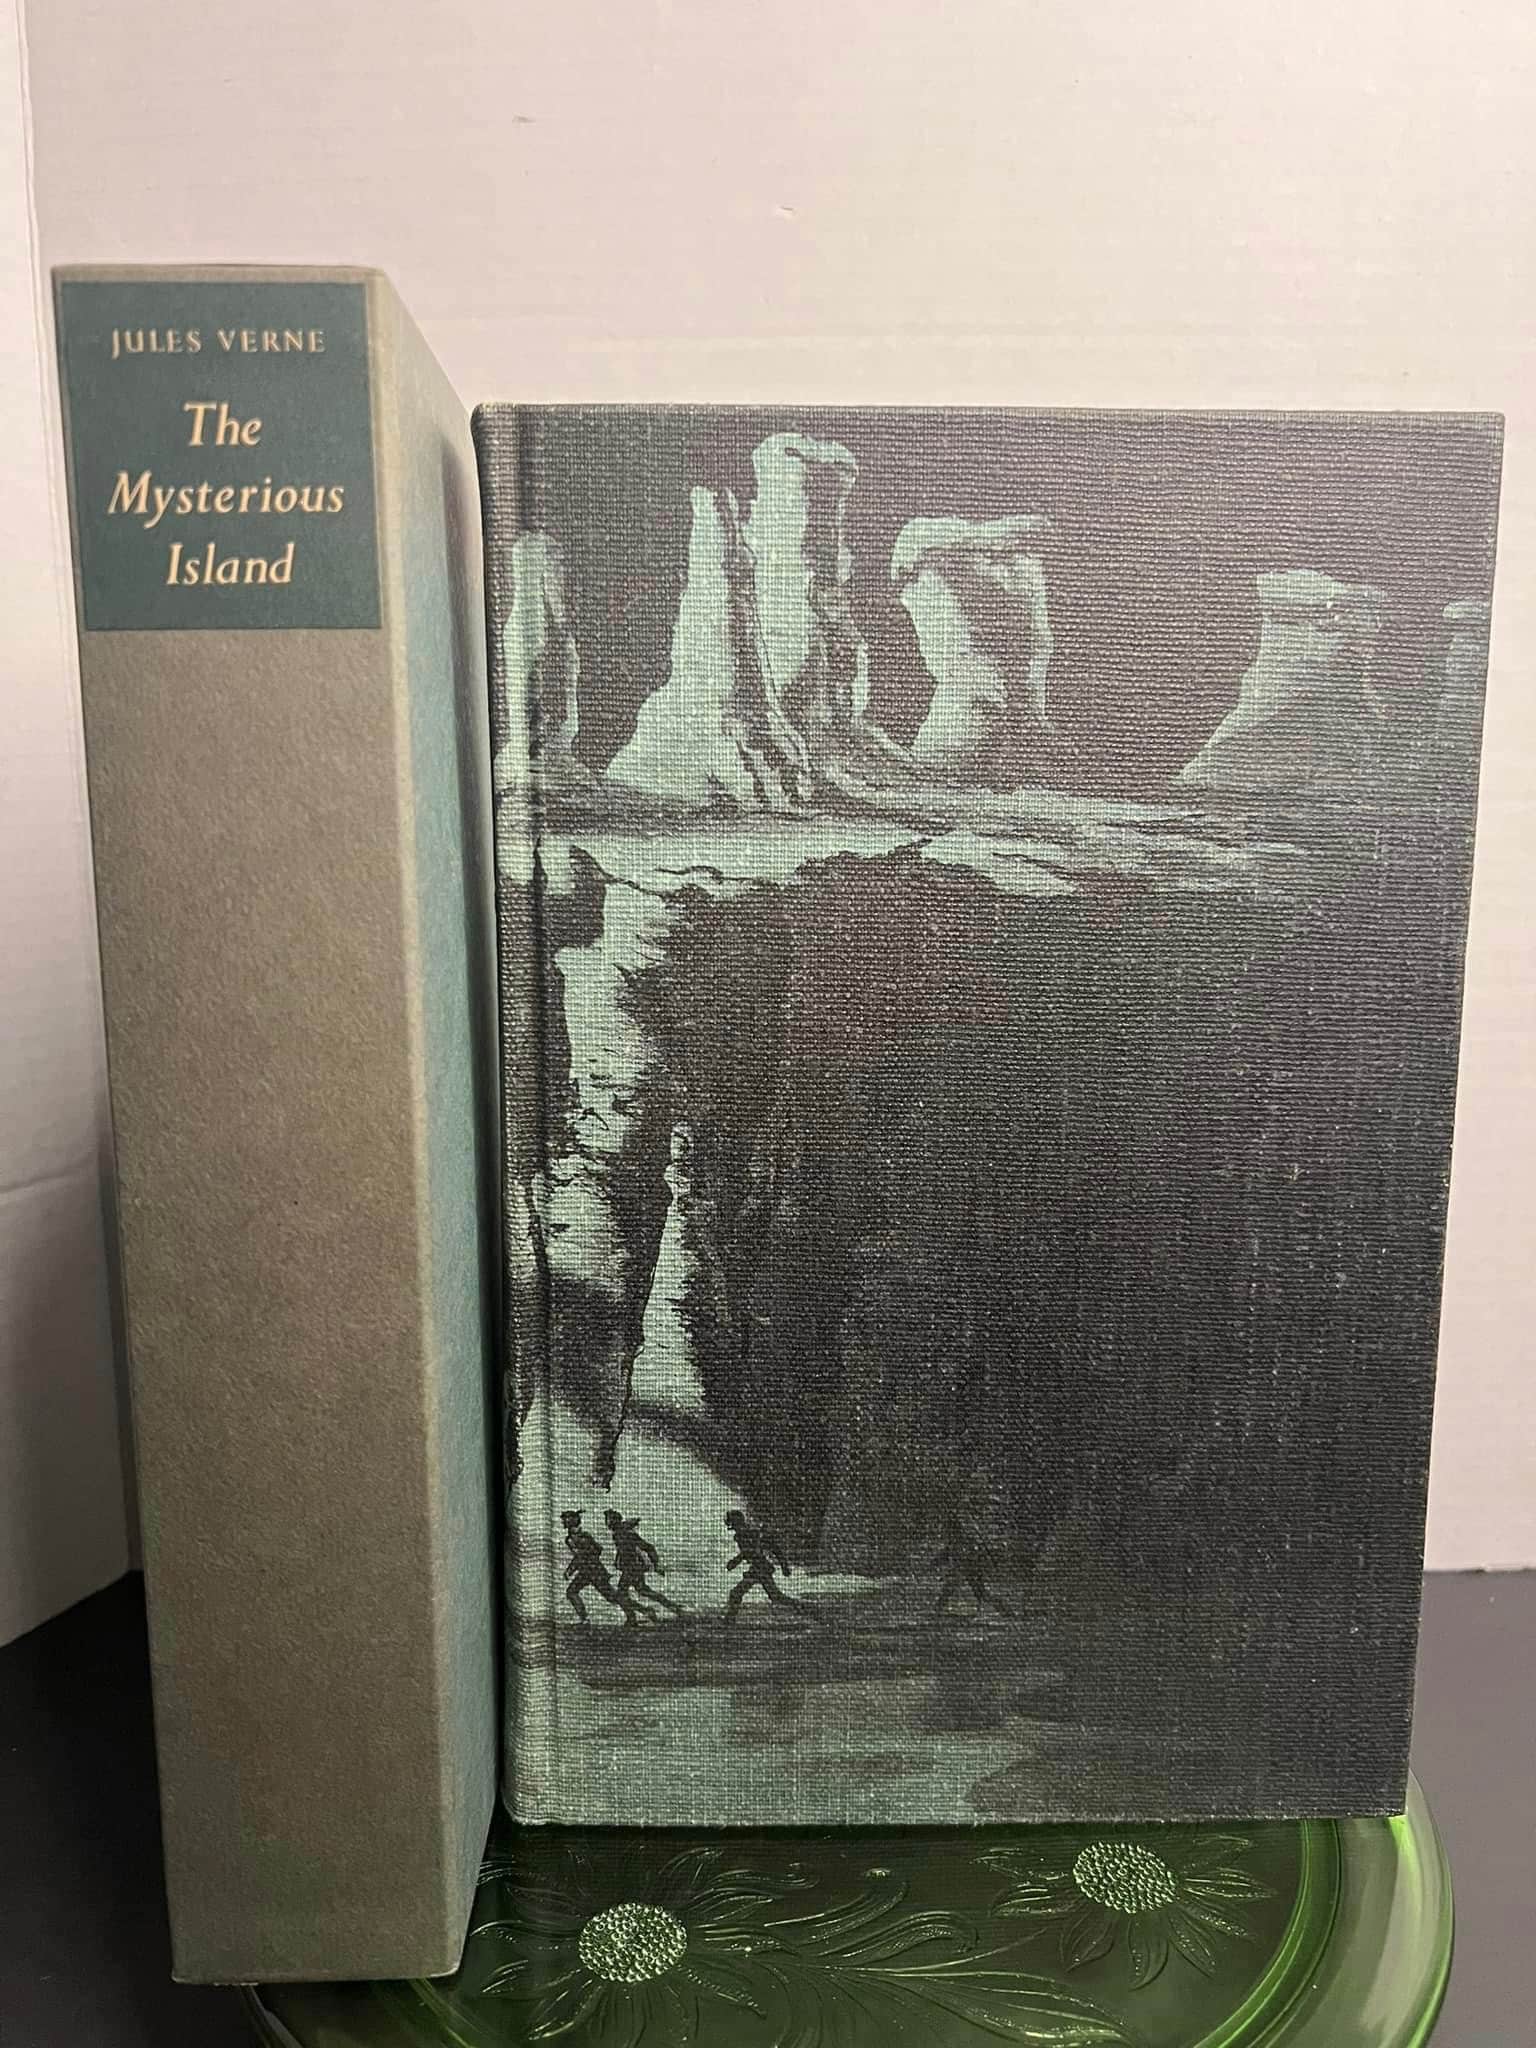 Vintage 1959 - The mysterious island Jules Verne limited editions club